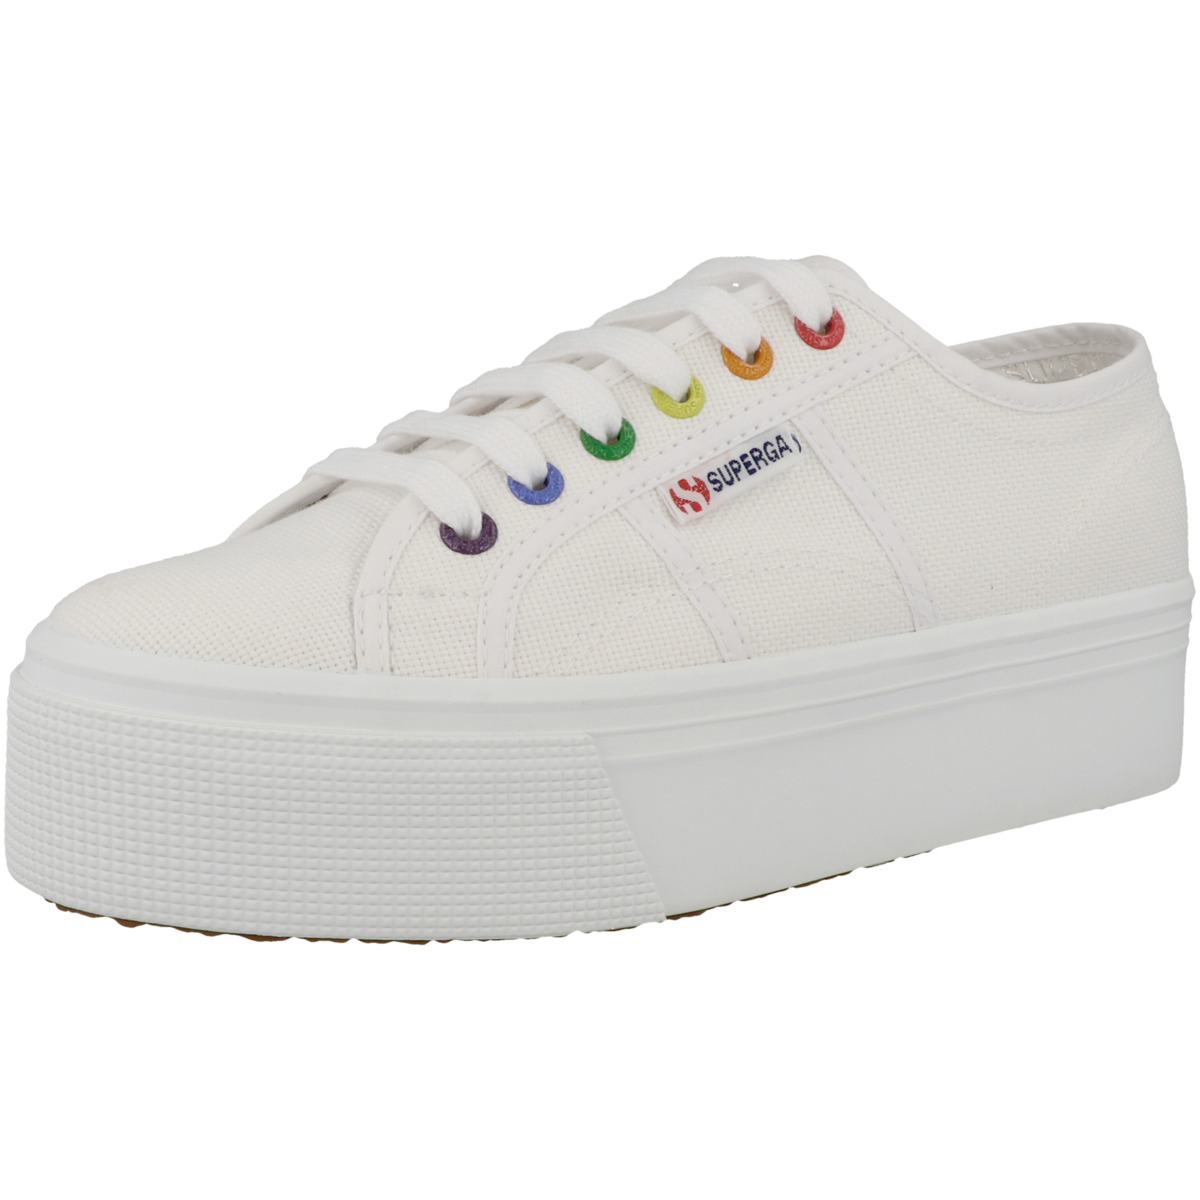 Superga 2790 Heart Outsole Patch Sneaker low